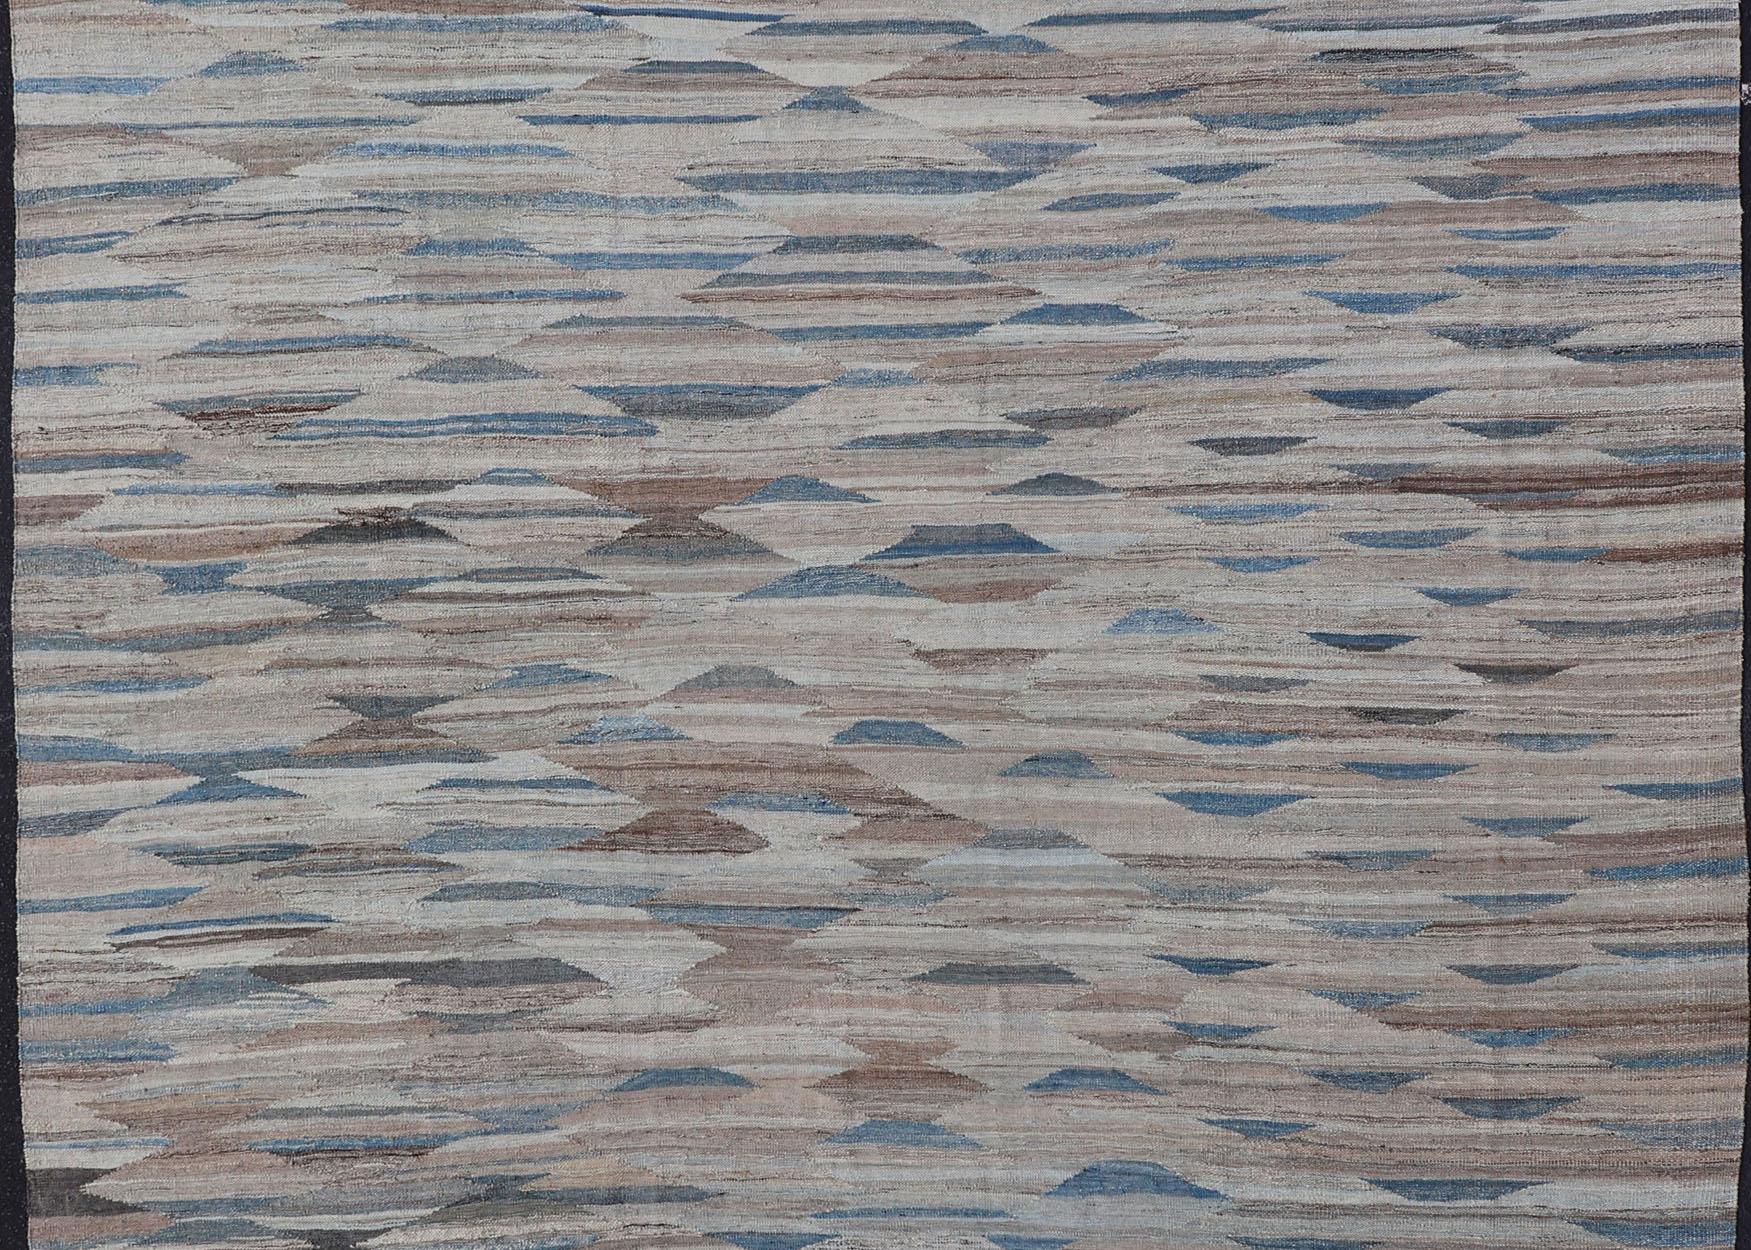 Afghan  Modern Kilim with Geometrics in  variation of Blue , Brown, Tan & Neutral Tones For Sale